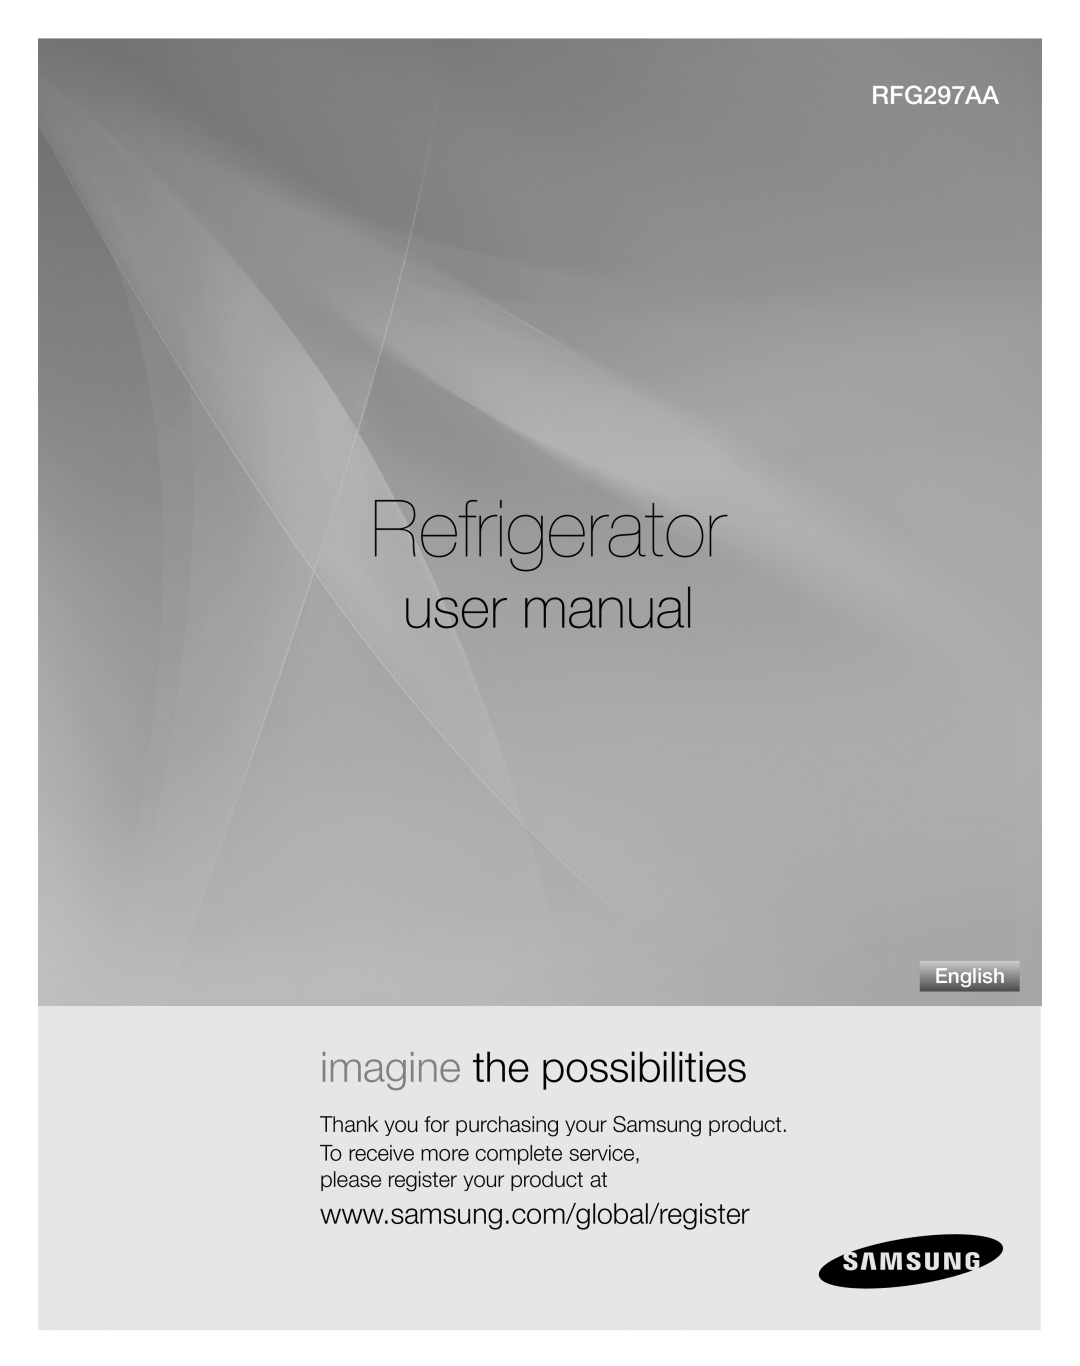 Sears RFG297AA manual please register your product at, Refrigerator, imagine the possibilities, English 